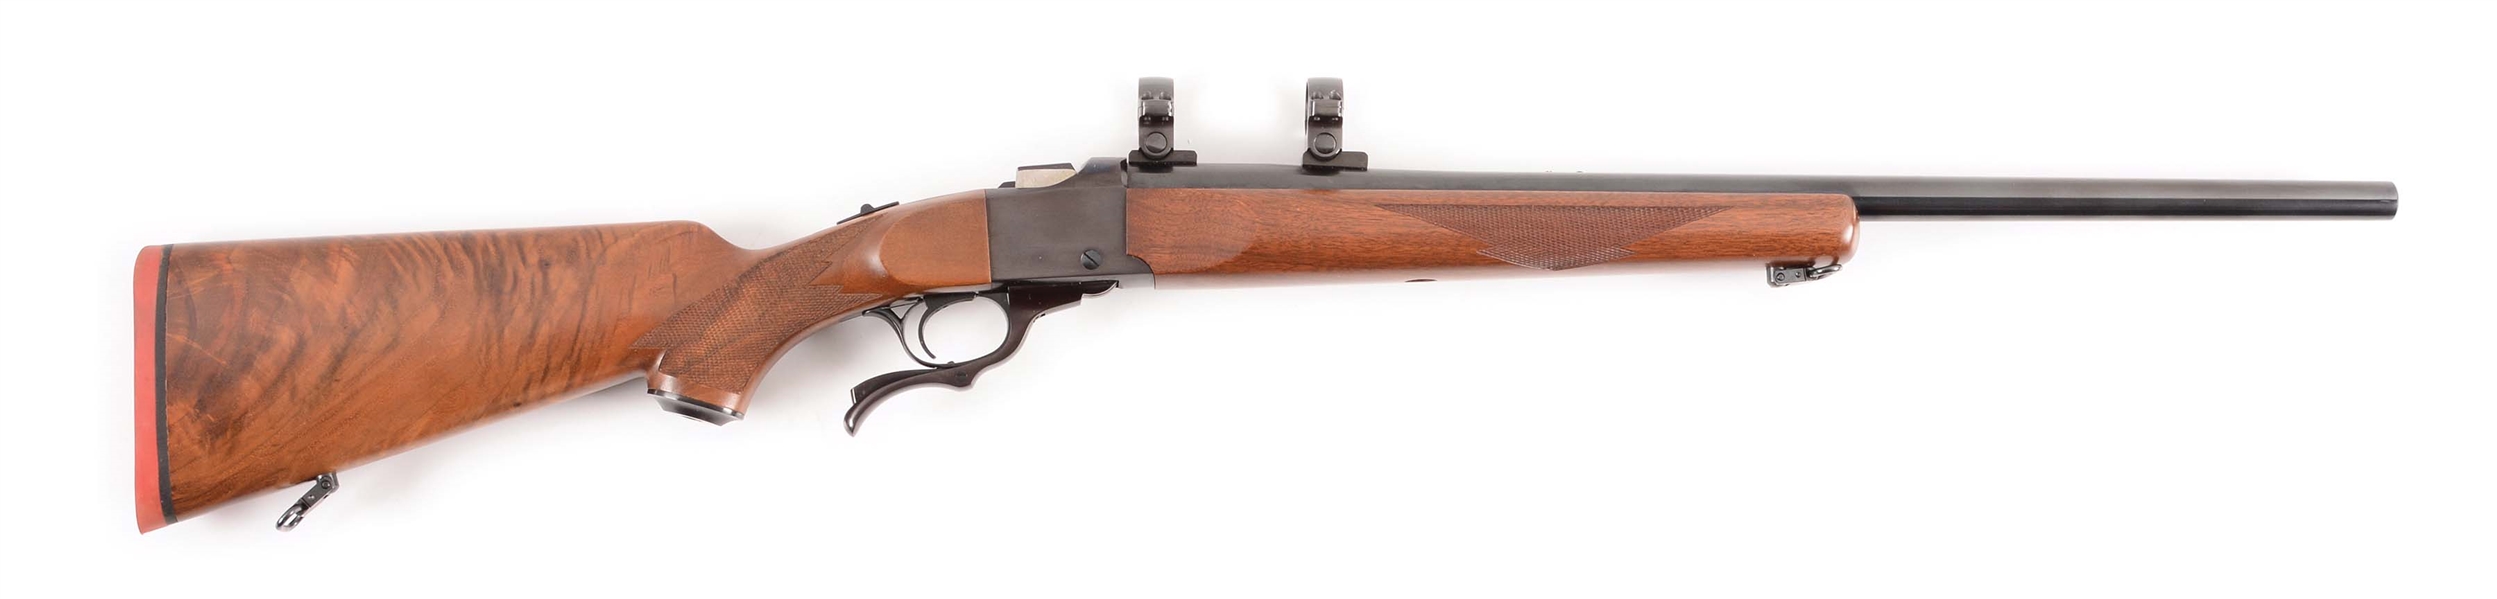 (M) RUGER NO. 1 .22-250 SINGLE SHOT RIFLE WITH BOX.